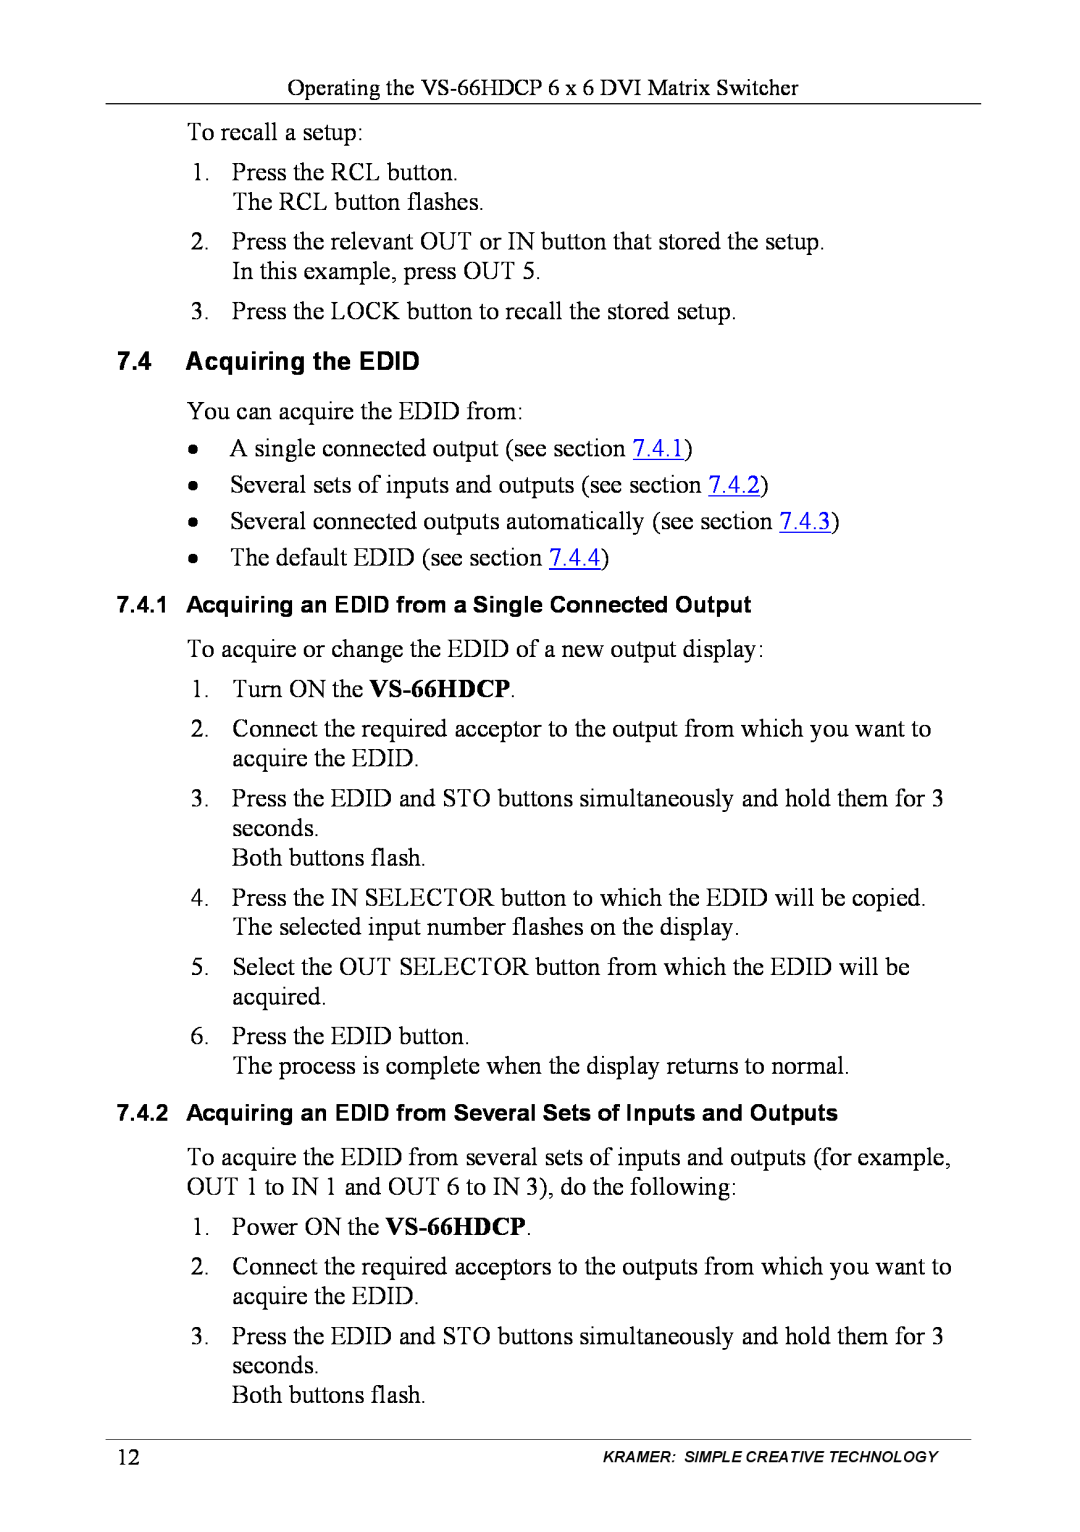 Kramer Electronics VS-66hdcp user manual Acquiring the EDID, Acquiring an EDID from a Single Connected Output 